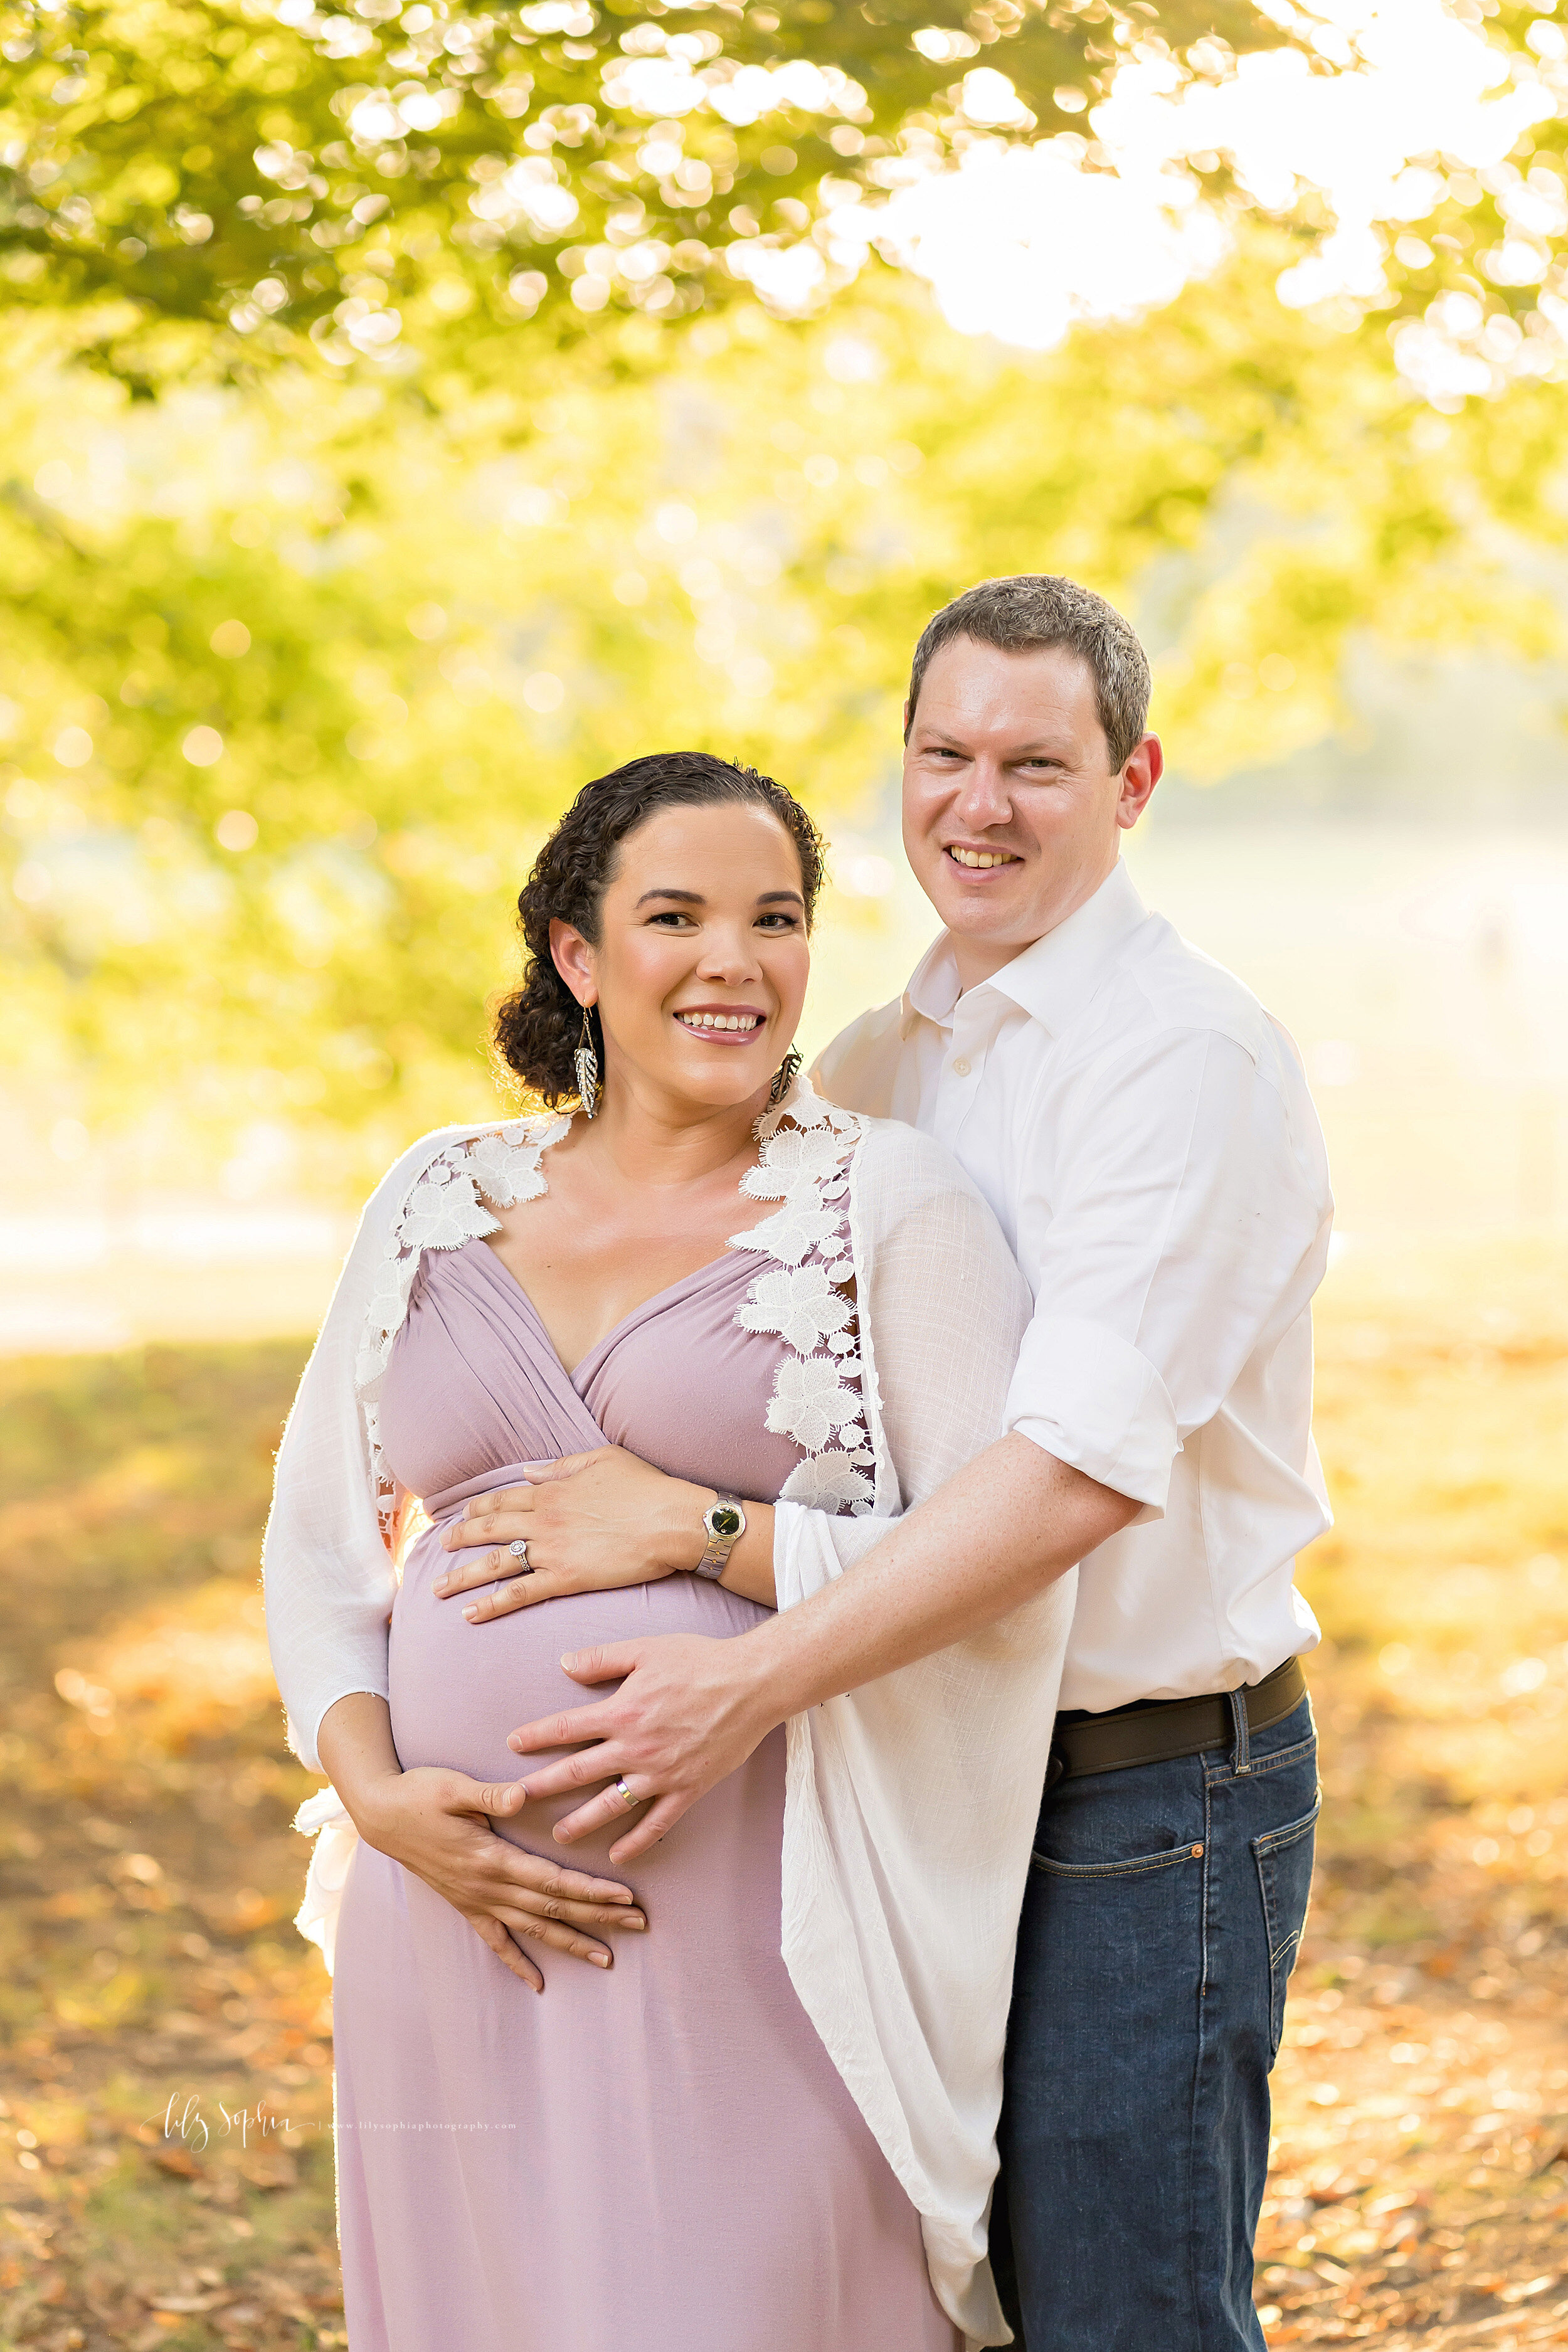 atlanta-decatur-old-fourth-ward-poncey-highlands-candler-park-grant-park-brookhaven-buckhead-virginia-highlands-west-end-decatur-lily-sophia-photography-family-maternity-park-session_2410.jpg